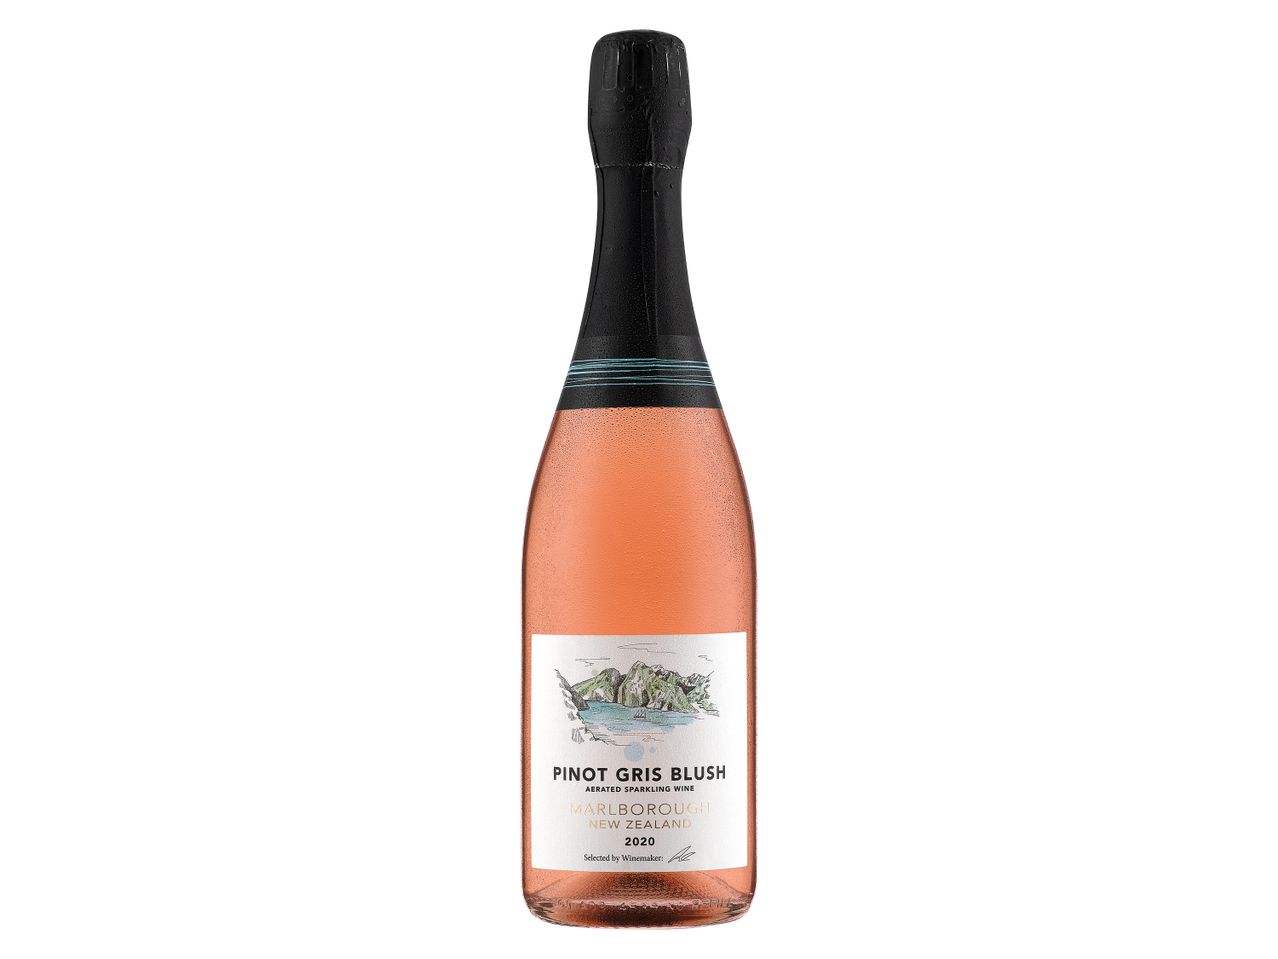 Go to full screen view: Pinot Gris Blush - Image 1